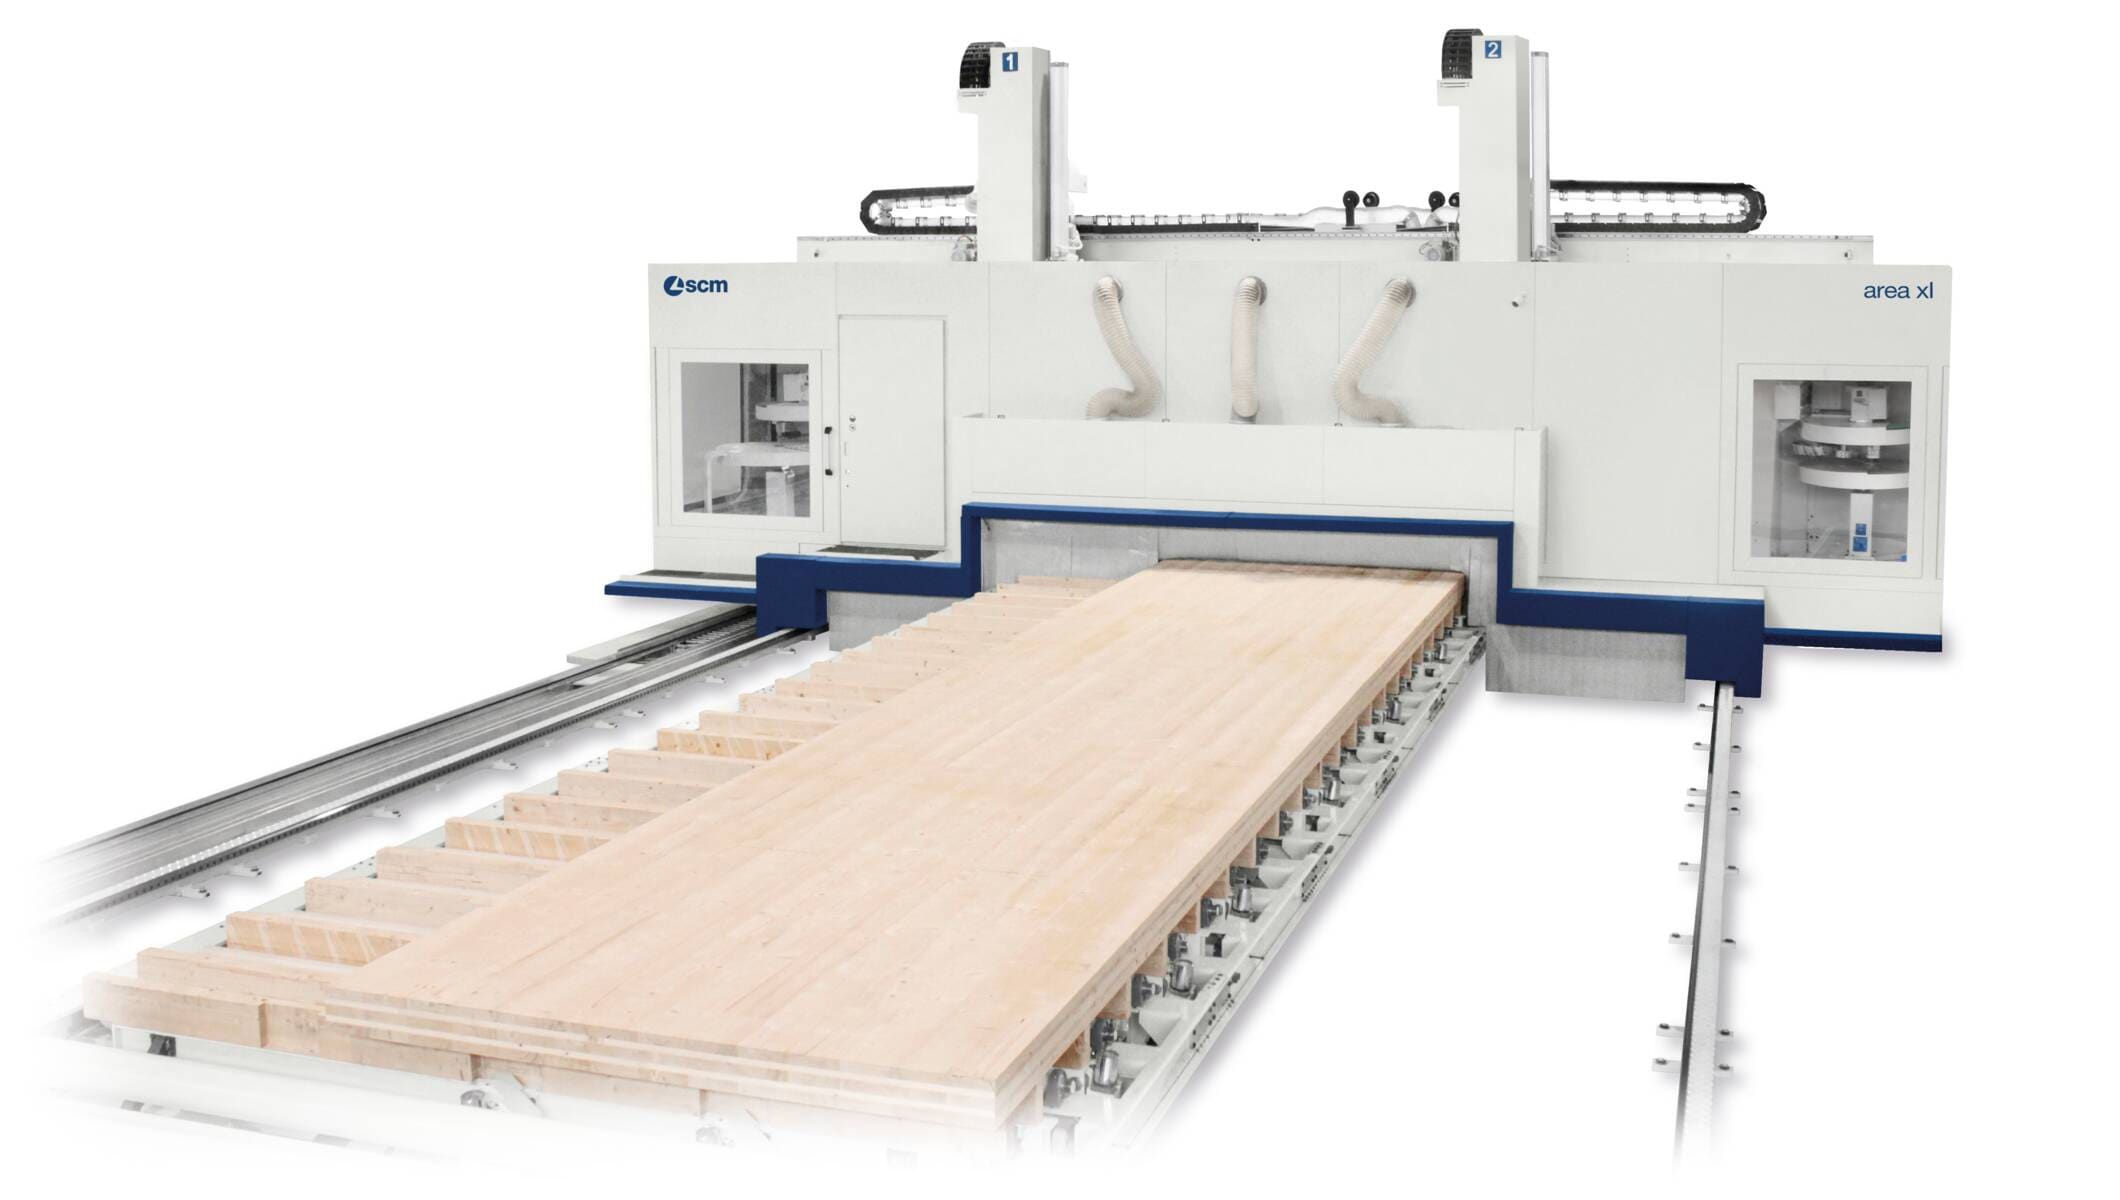 Systems for timber construction - CNC Machining Centres for timber construction - area xl